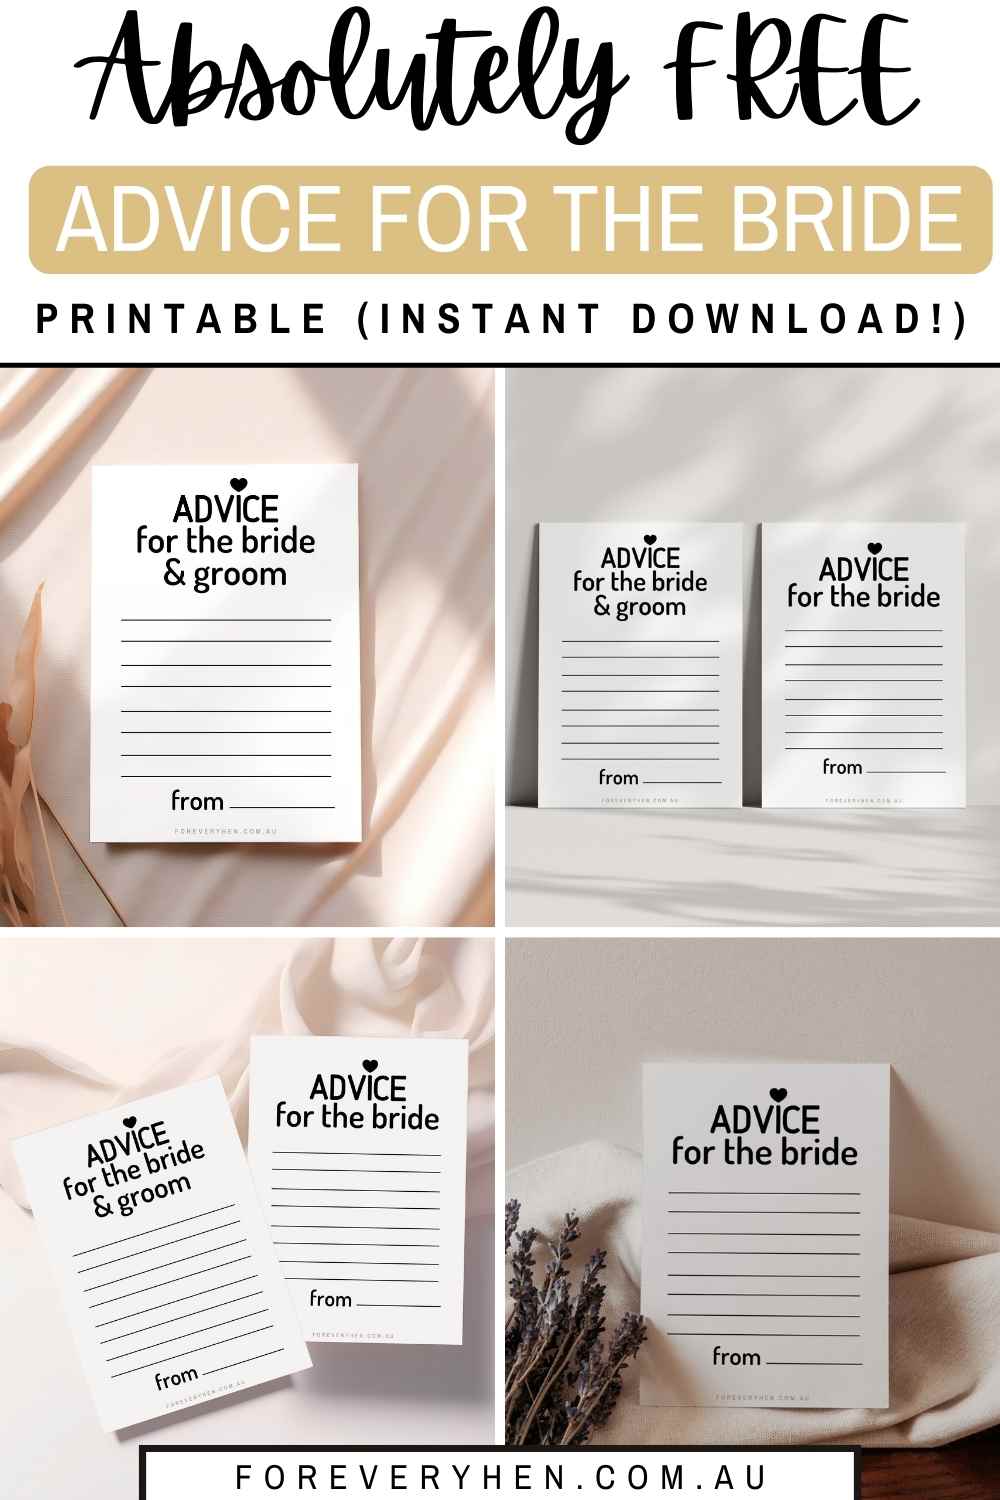 Absolutely FREE Advice for the Bride printable